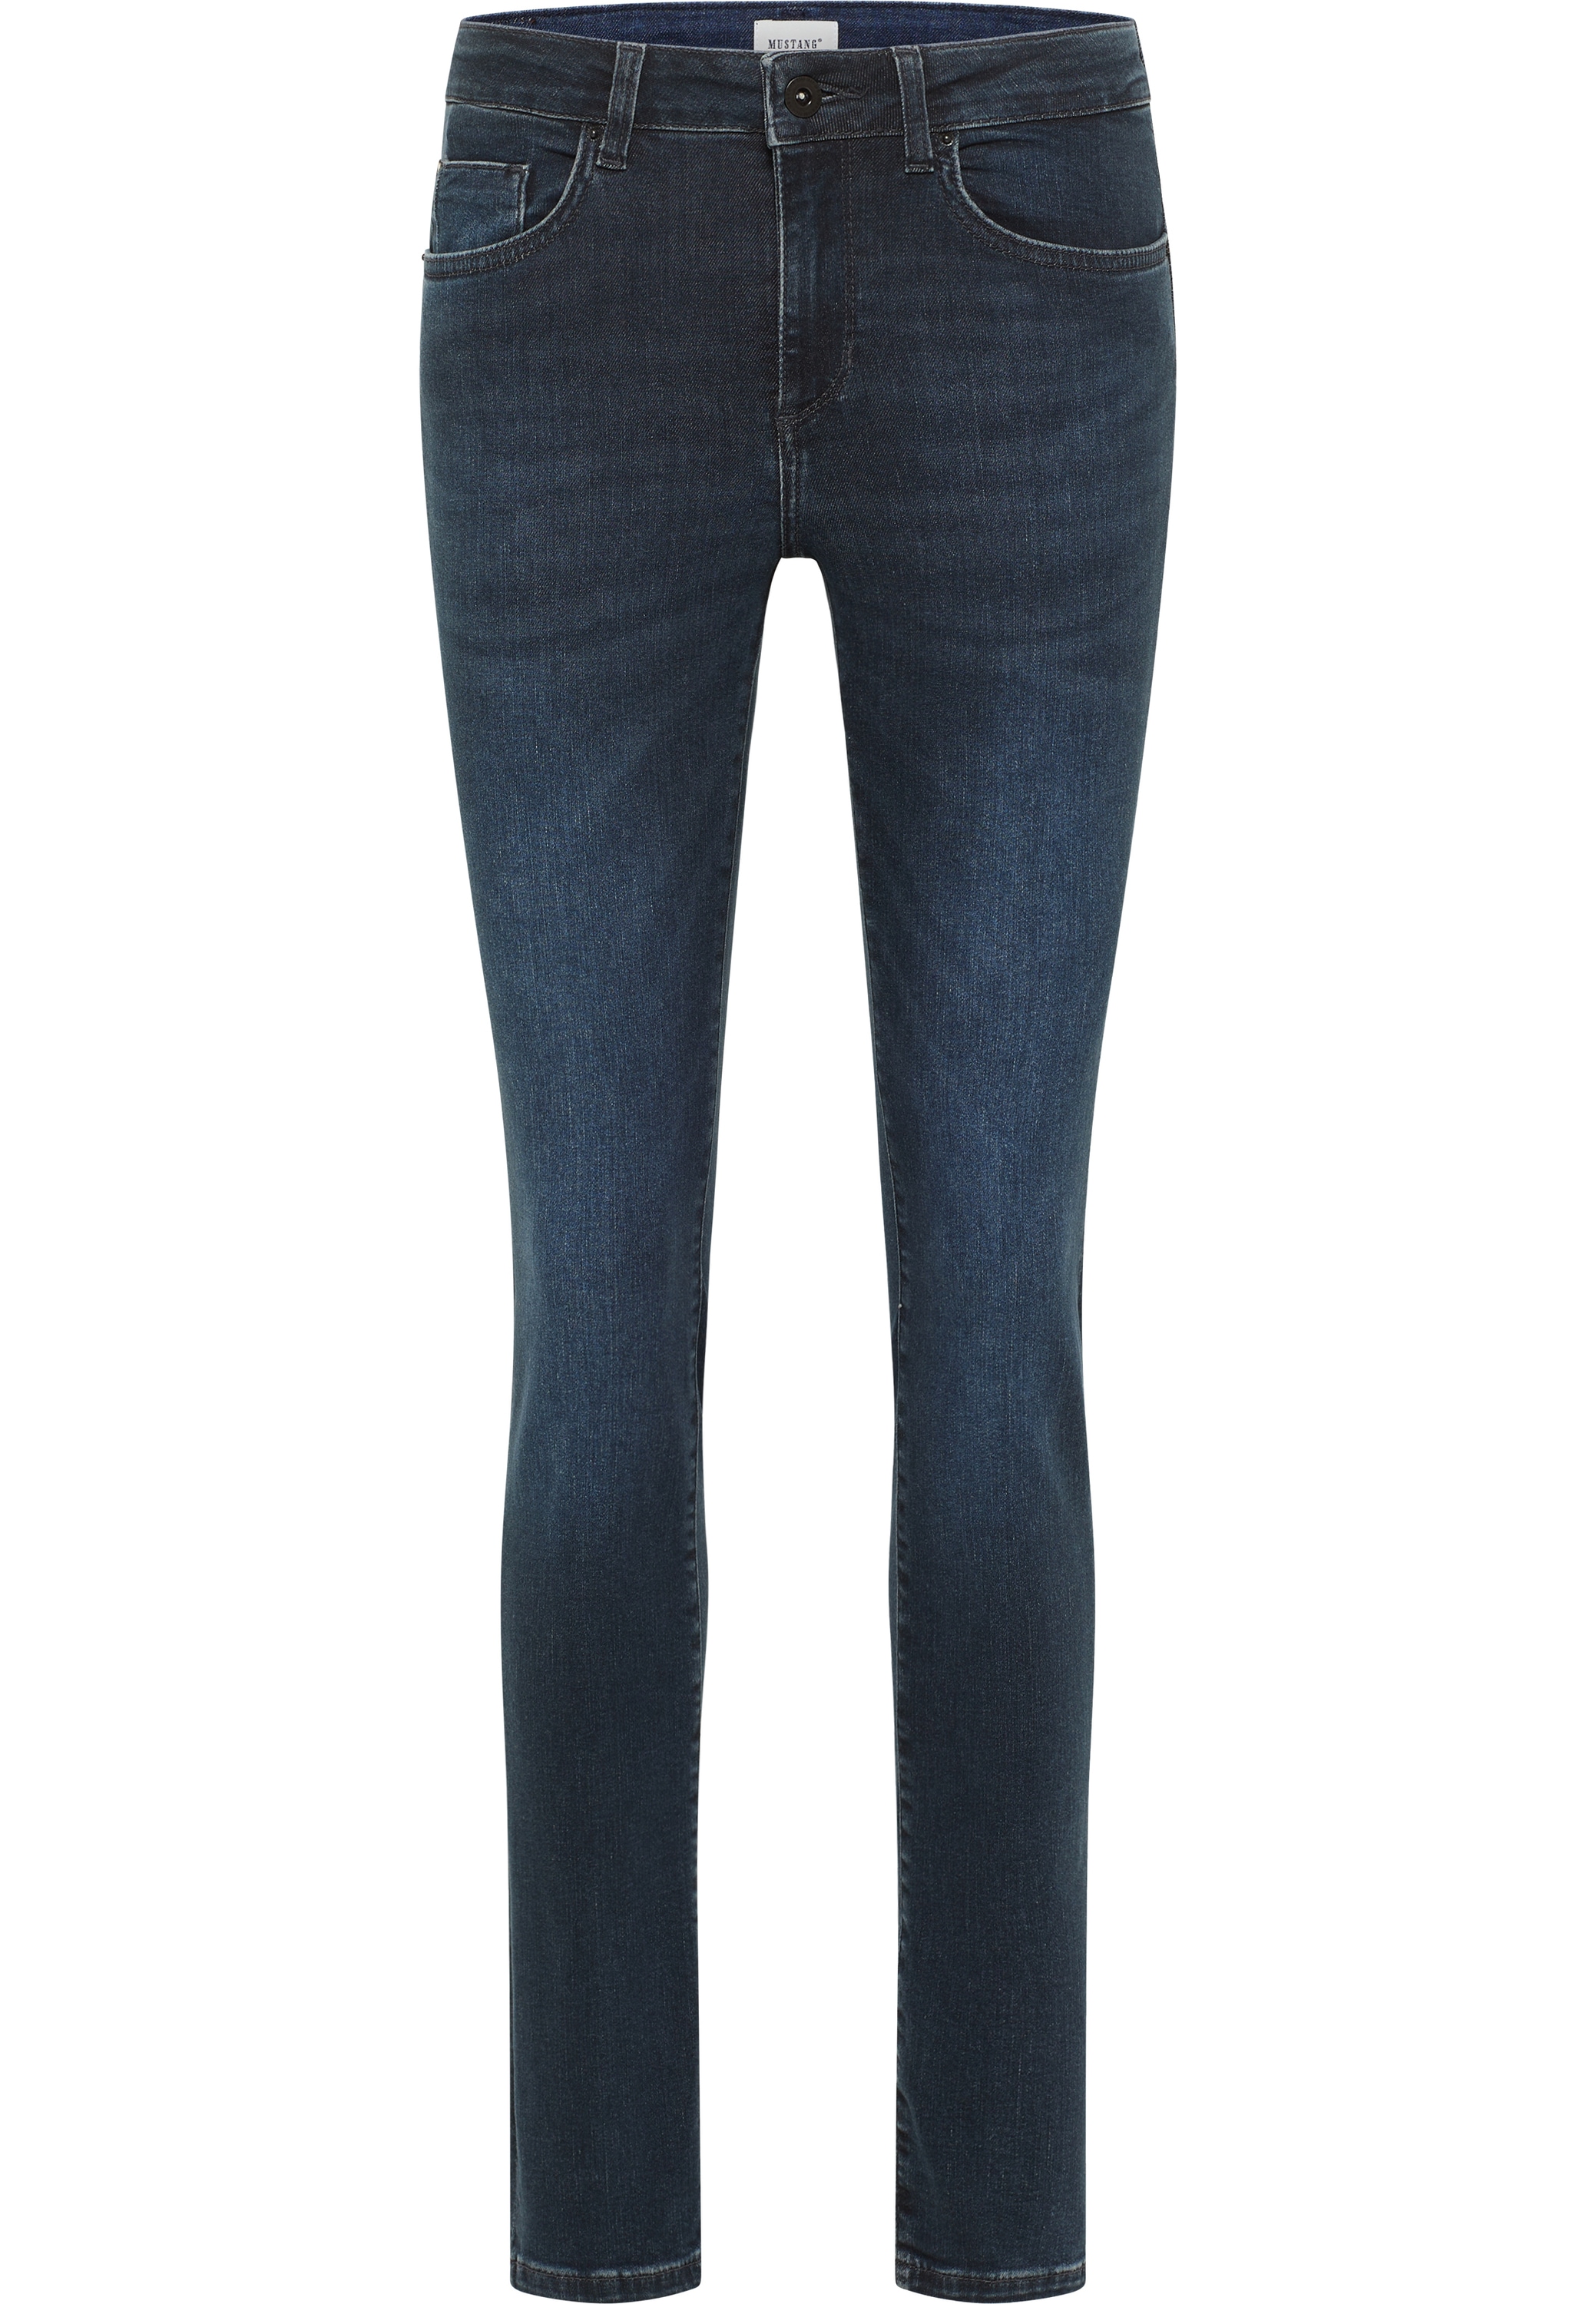 MUSTANG Slim-fit-Jeans »Shelby Slim«